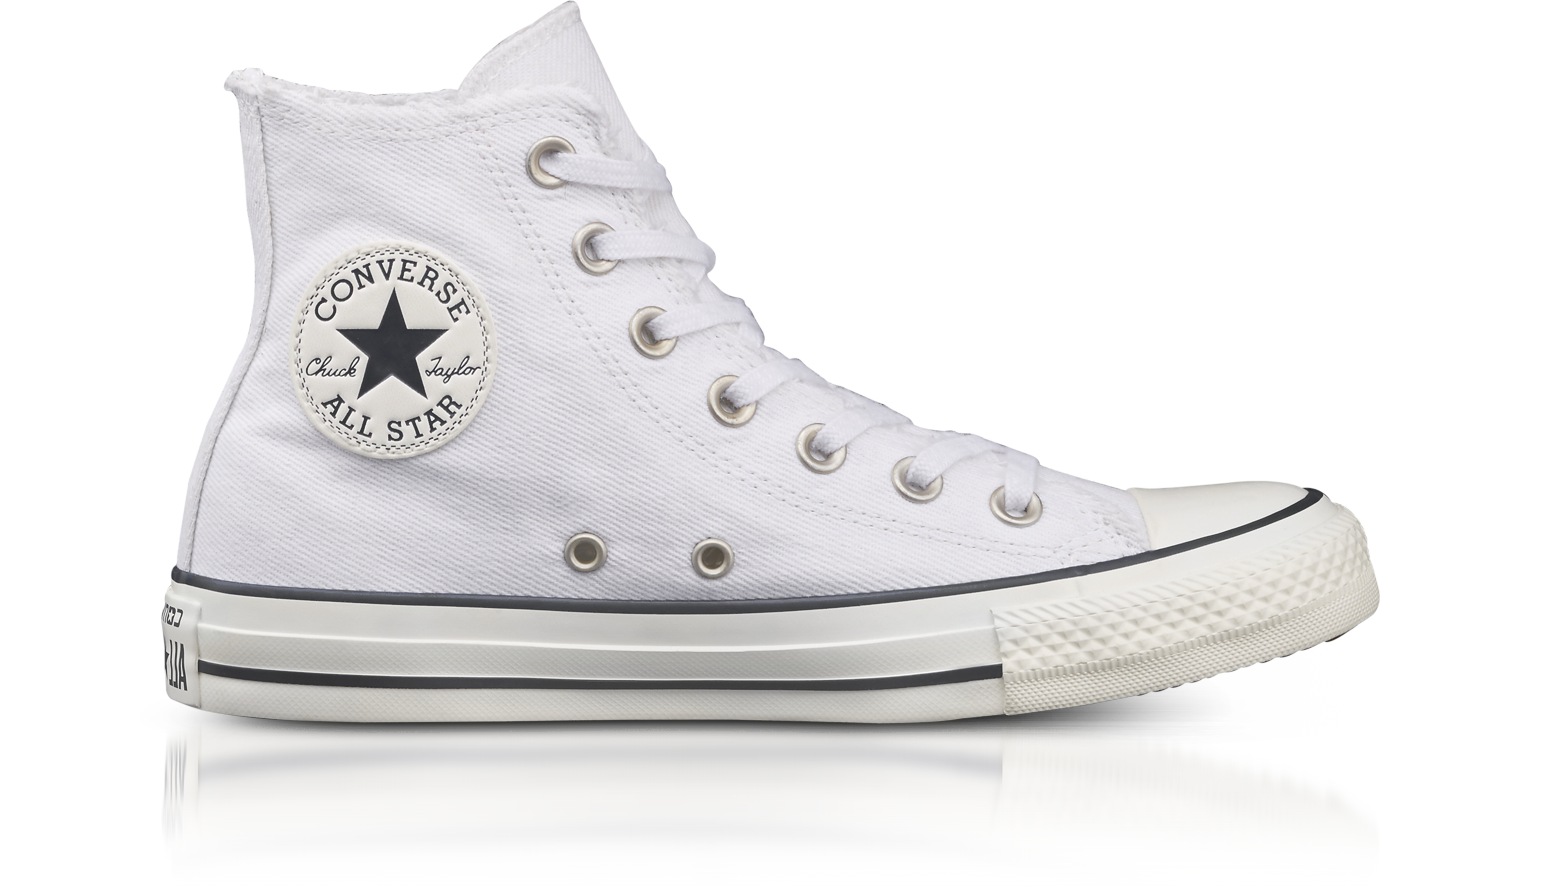 converse all star chuck taylor limited edition